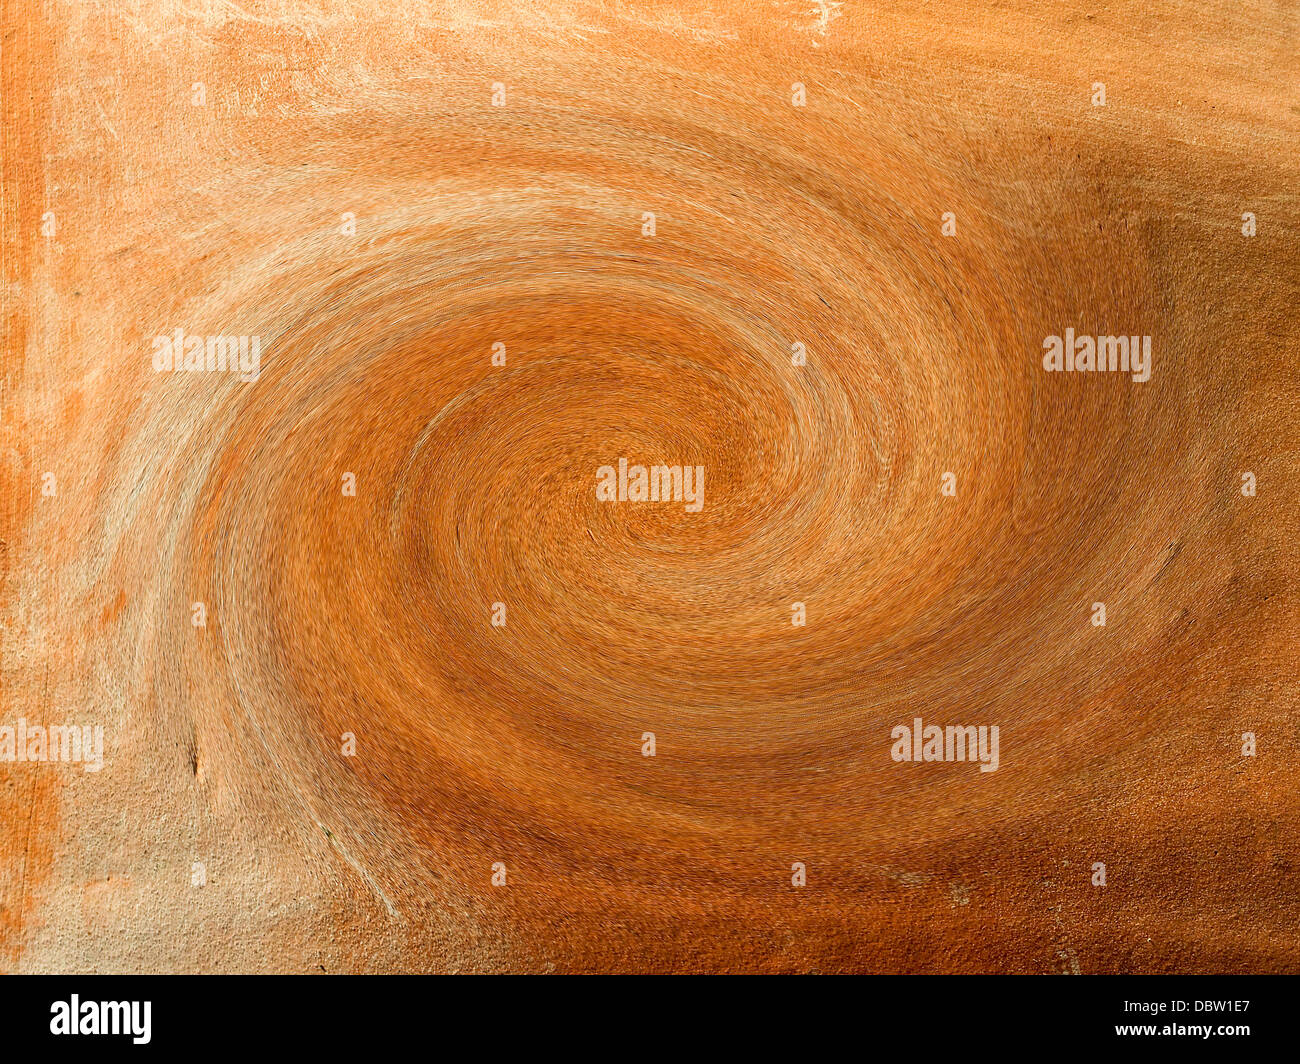 An intriguing swirl pattern in differing shades of Terracotta. Stock Photo